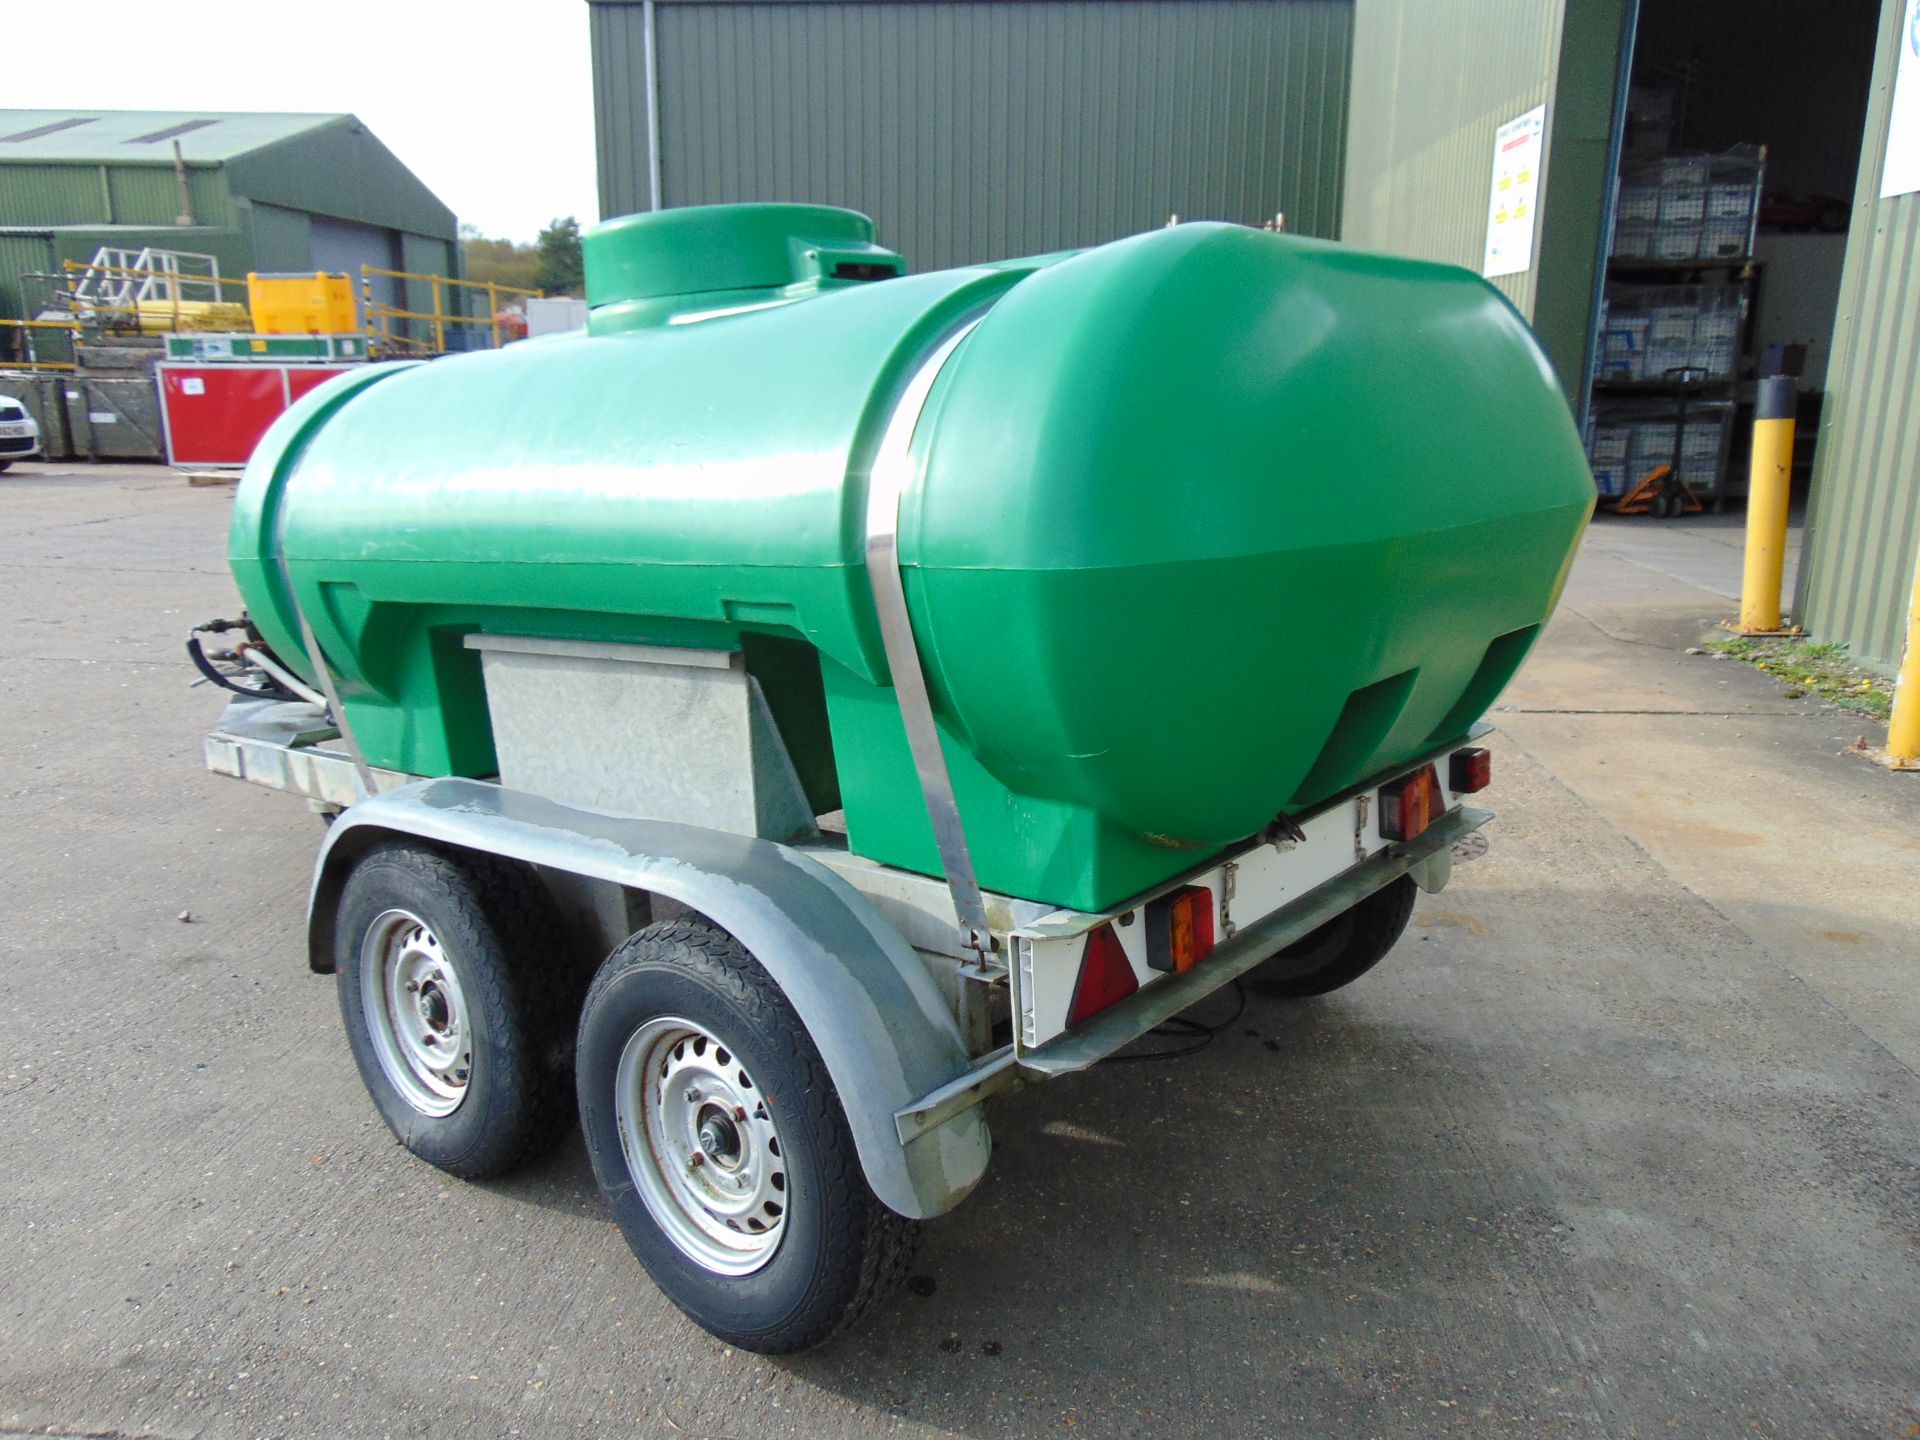 Morclean Trailer Mounted Pressure Washer with 2250 litre Water Tank and Yanmar Diesel Engine - Image 3 of 19